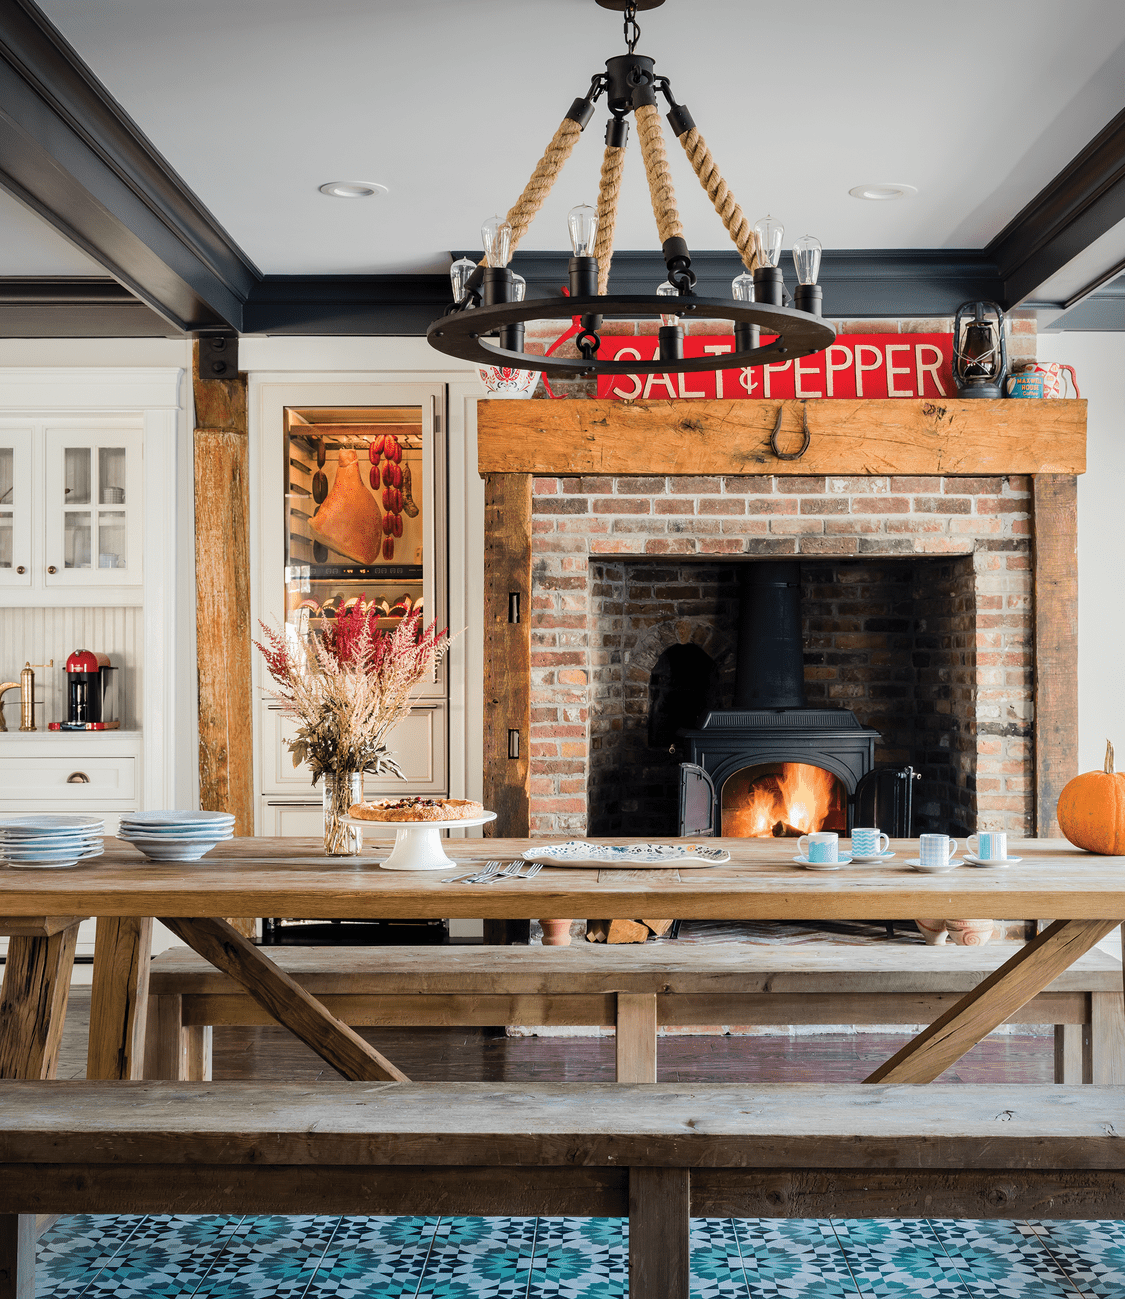 The kitchen addition marries old with new and reveals the passions and pastimes of the owners. Original fireplaces as well as chestnut posts and beams mix with new cabinetry, tile inlay floor, and modern charcuterie and coffee stations.